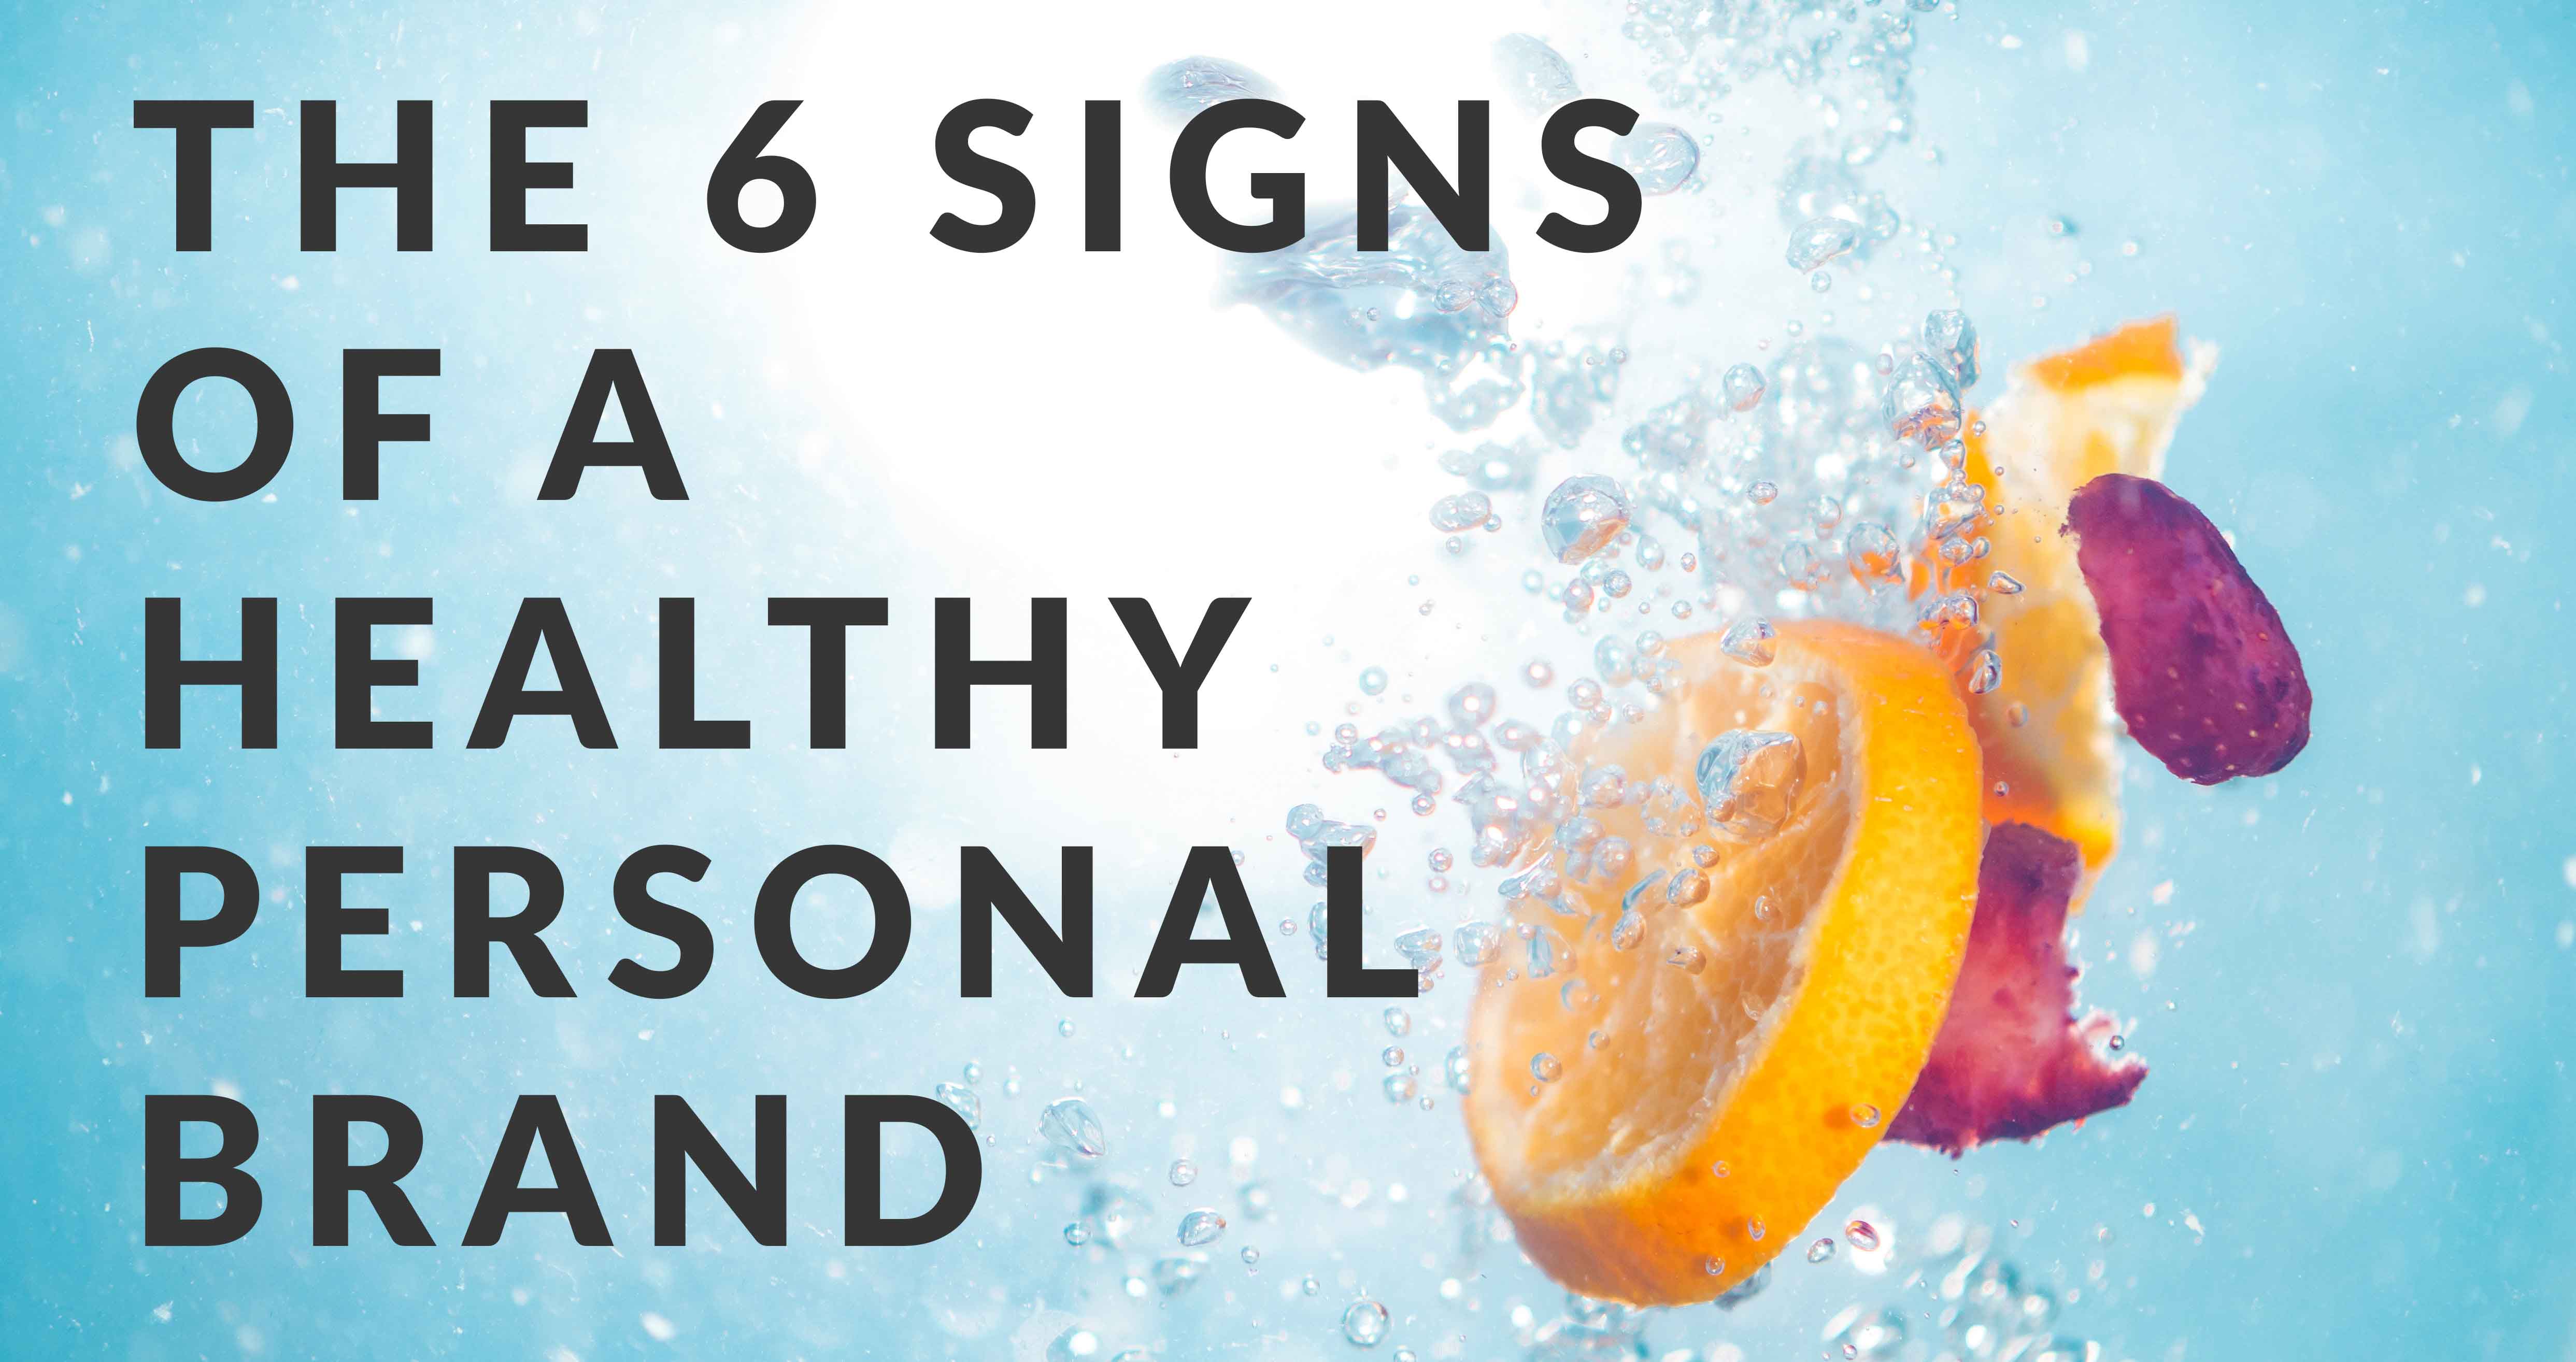 The 6 Signs of a Healthy Personal Brand